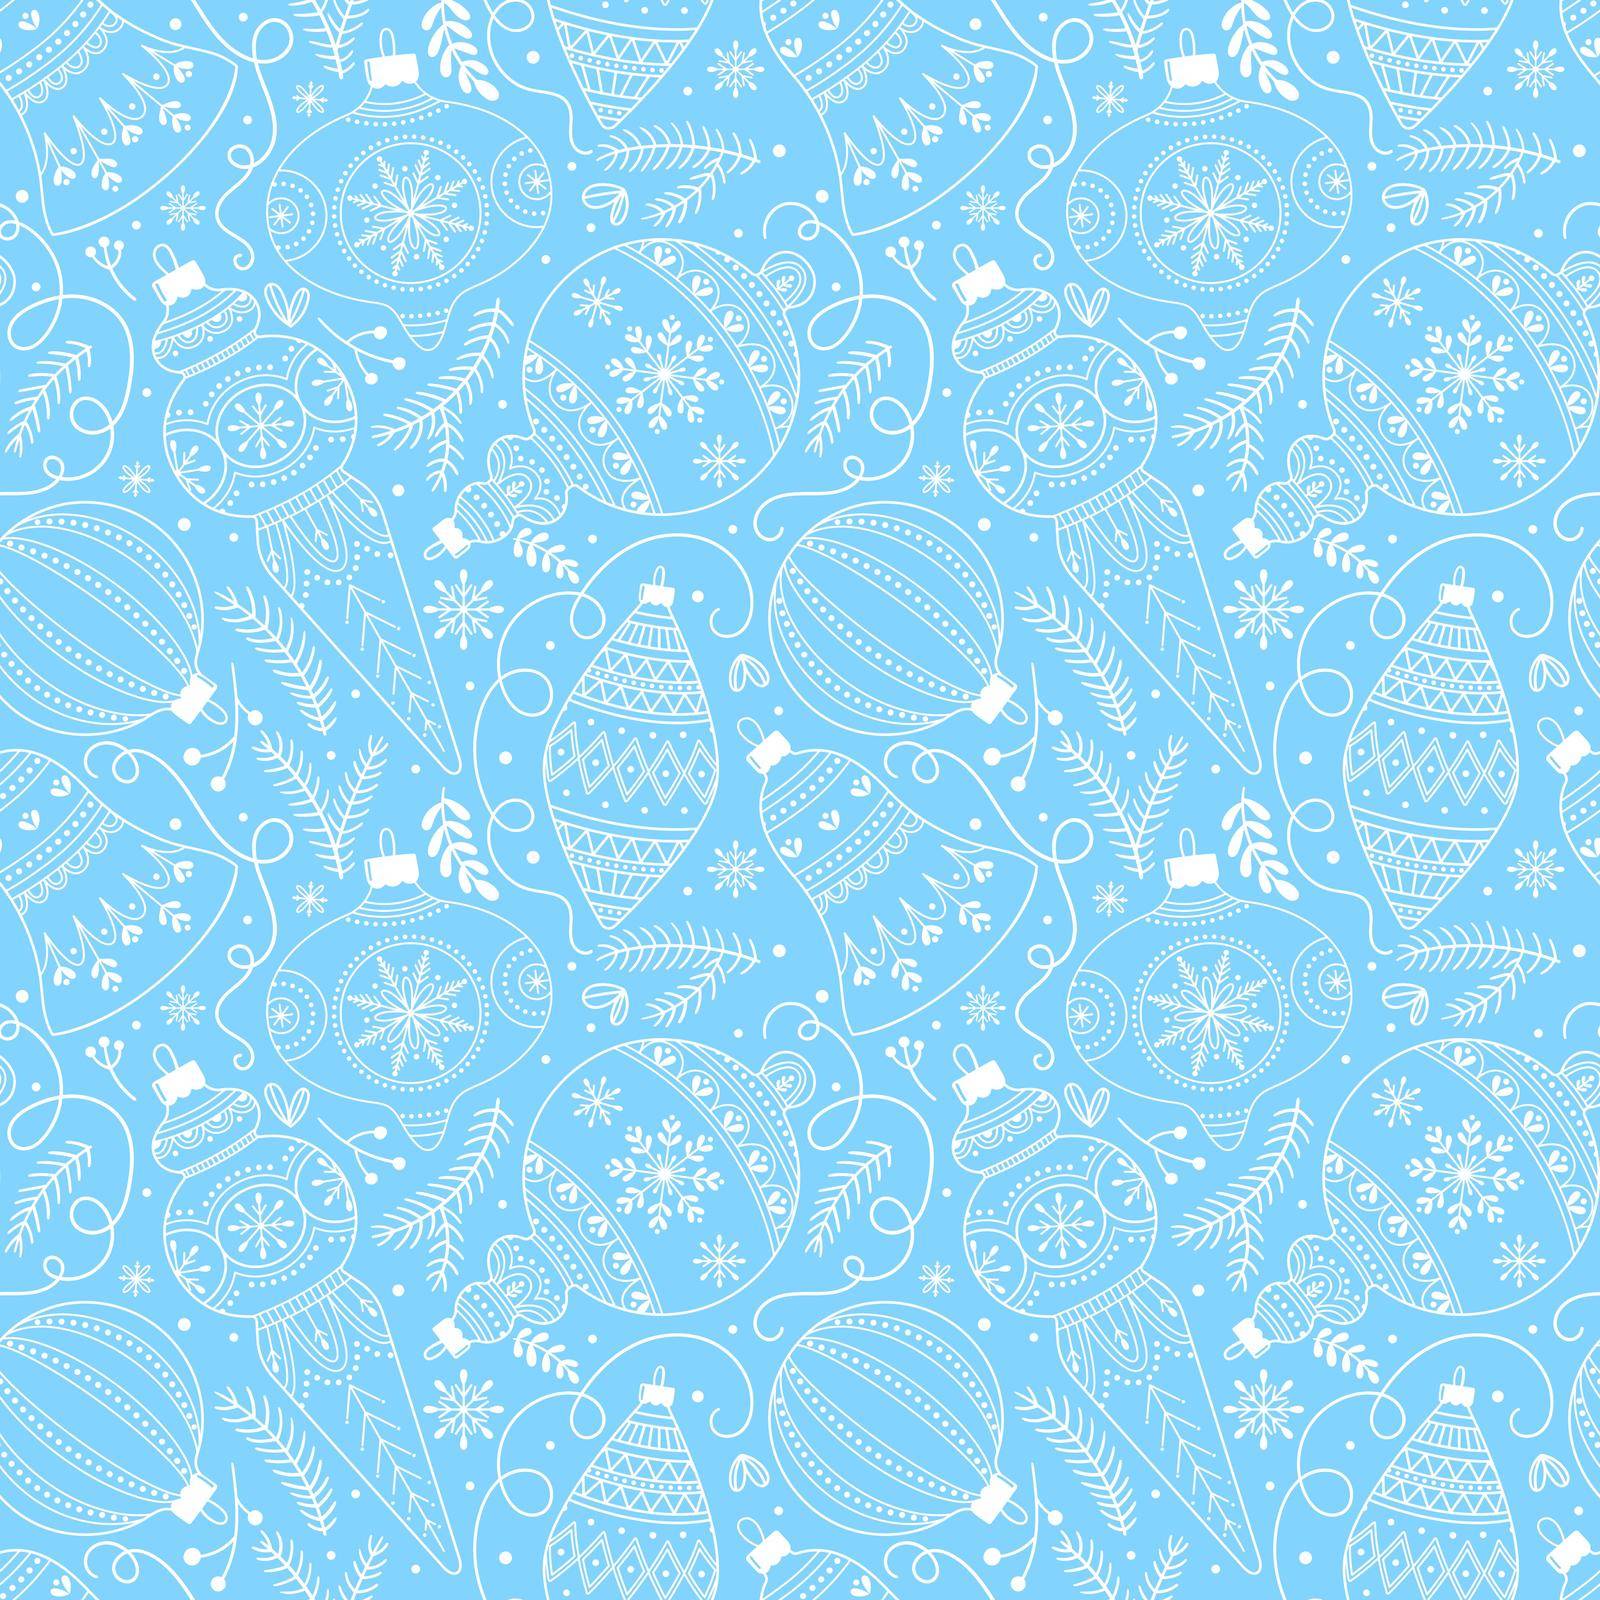 Seamless pattern with Christmas or New Year decor. Ideal for backgrounds, wrapping paper, covers, fabrics, etc. Vector illustration on a light blue background.